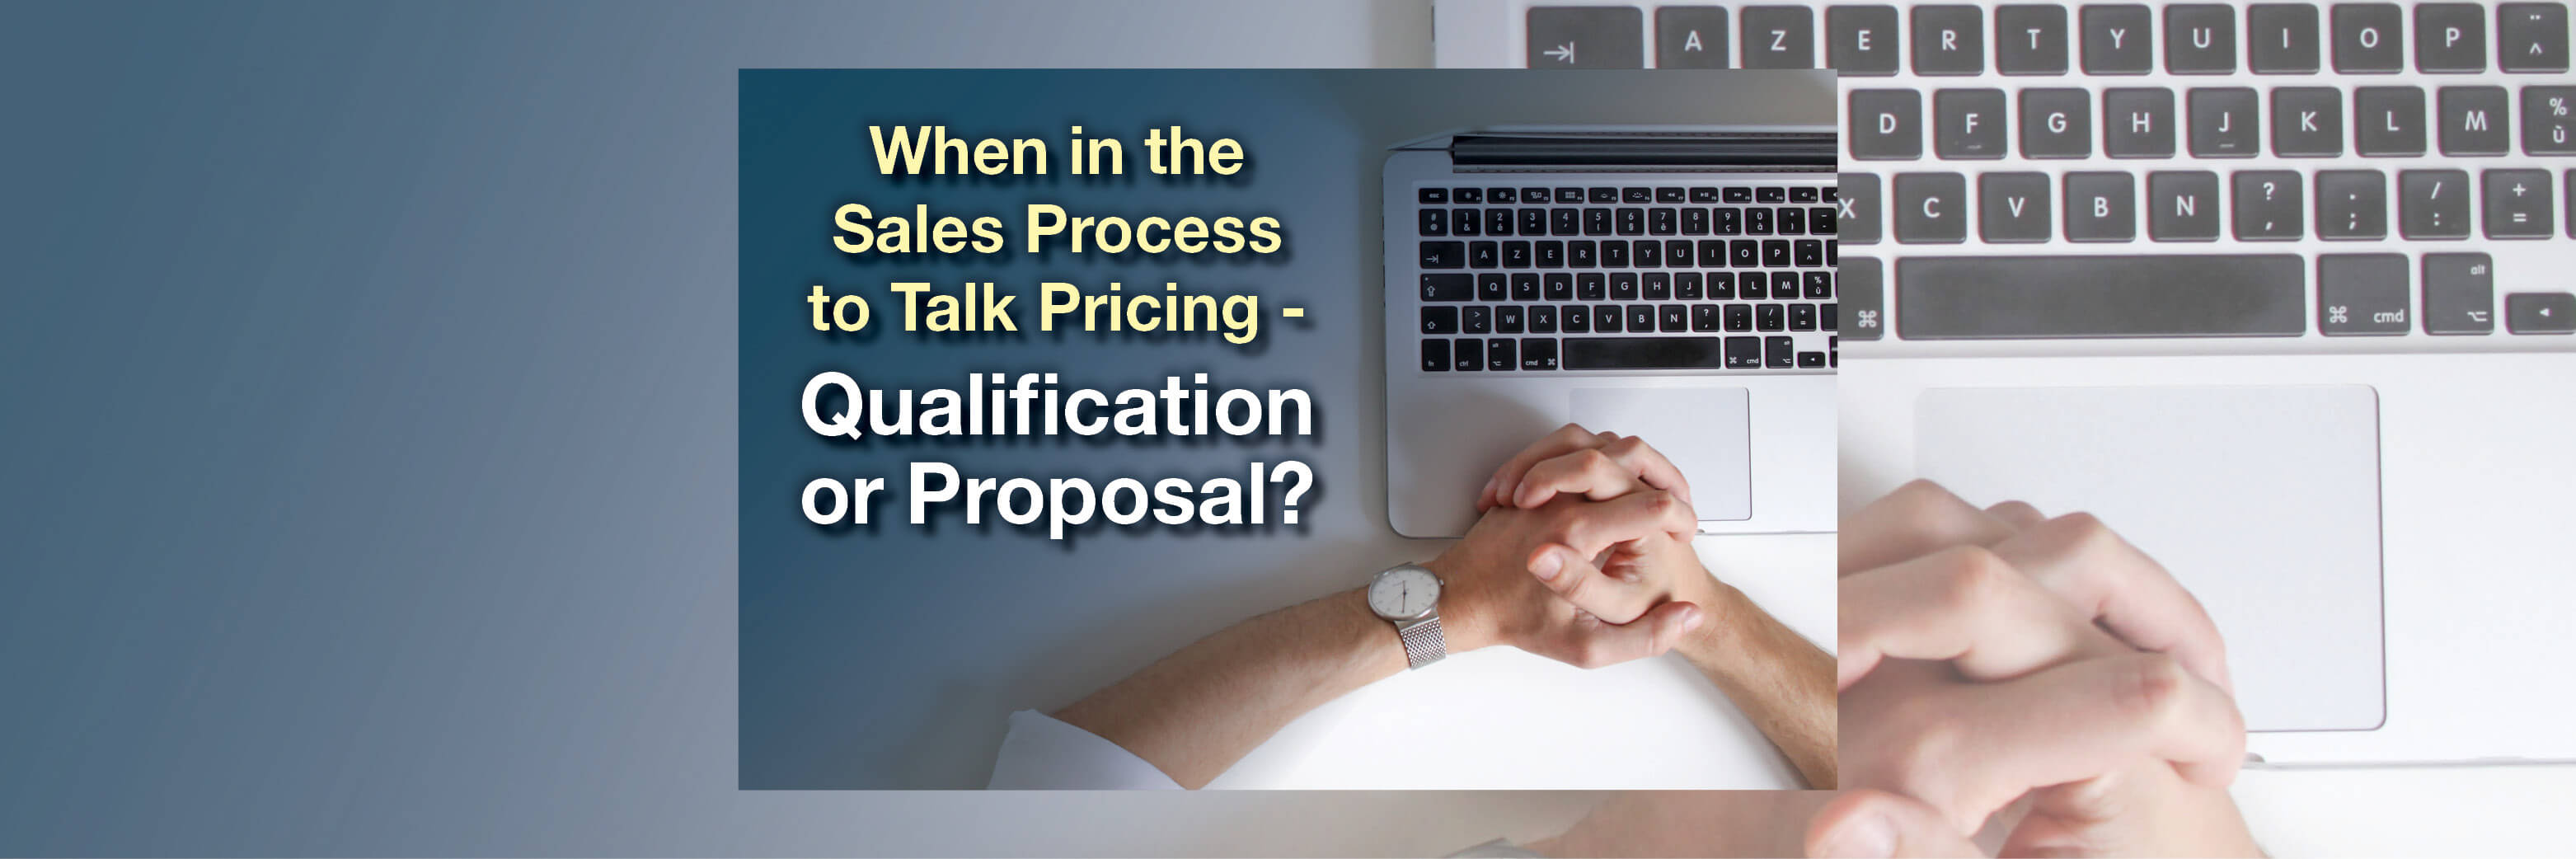 When in the Sales Process to Talk Pricing - Qualification or Proposal?